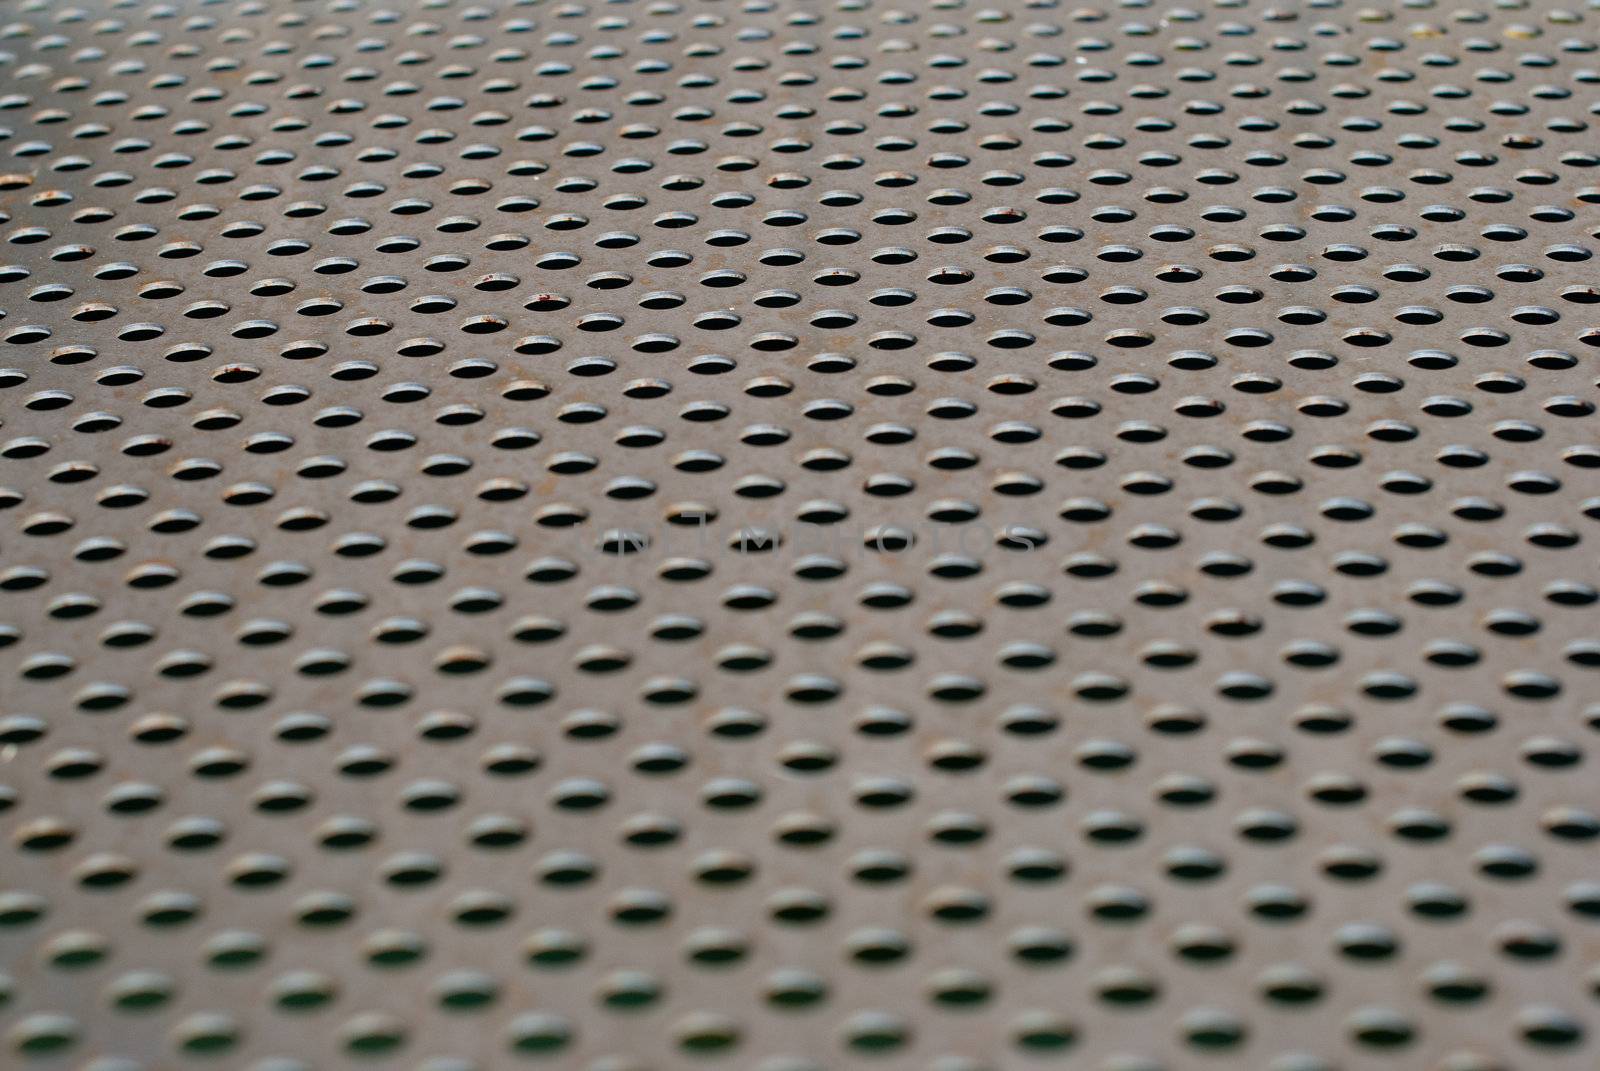 Metal surface texture details shot with natural light.